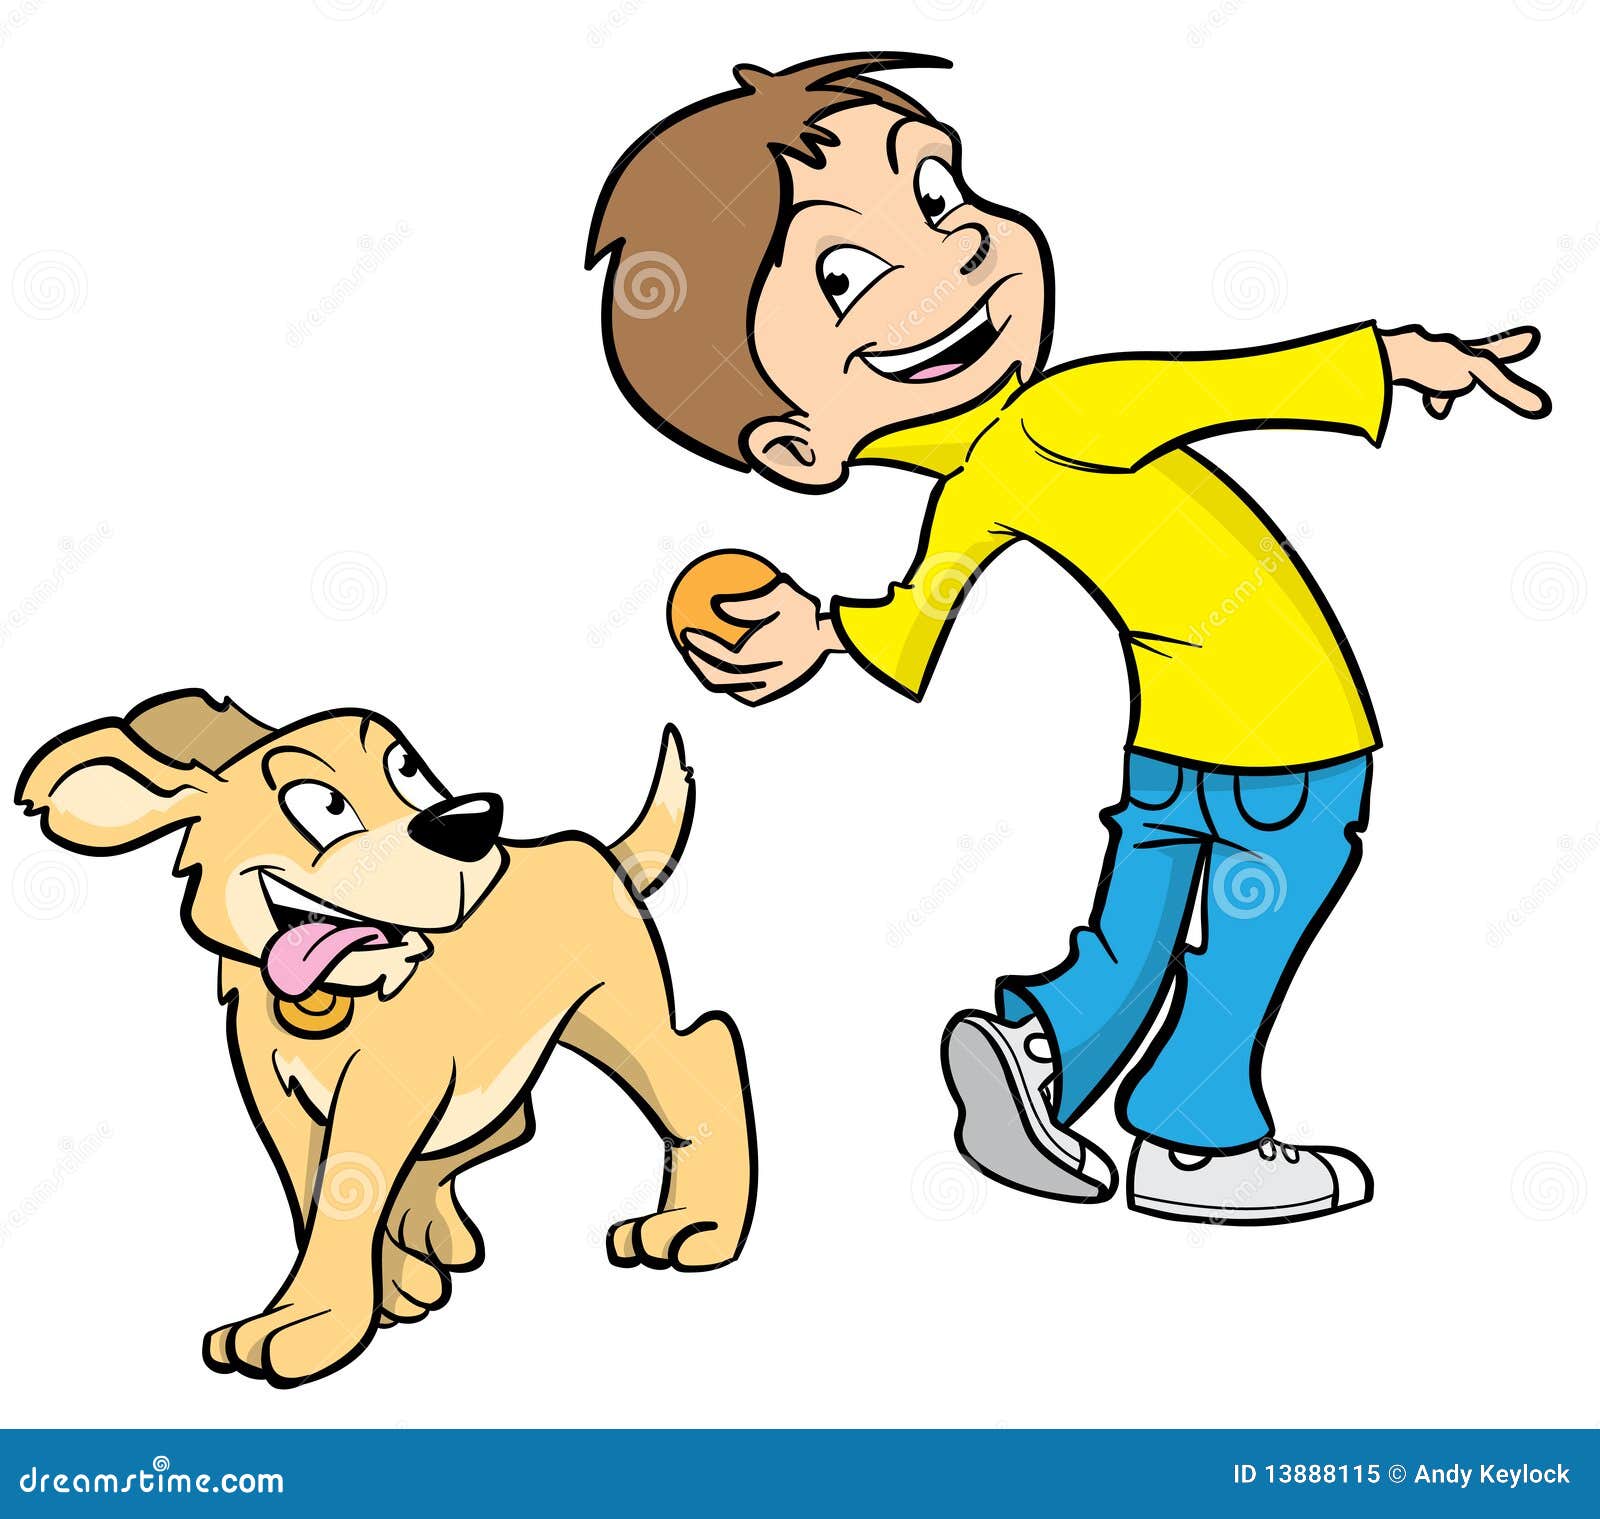 Cartoon Boy And Dog Stock Vector. Illustration Of Throwing - 13888115